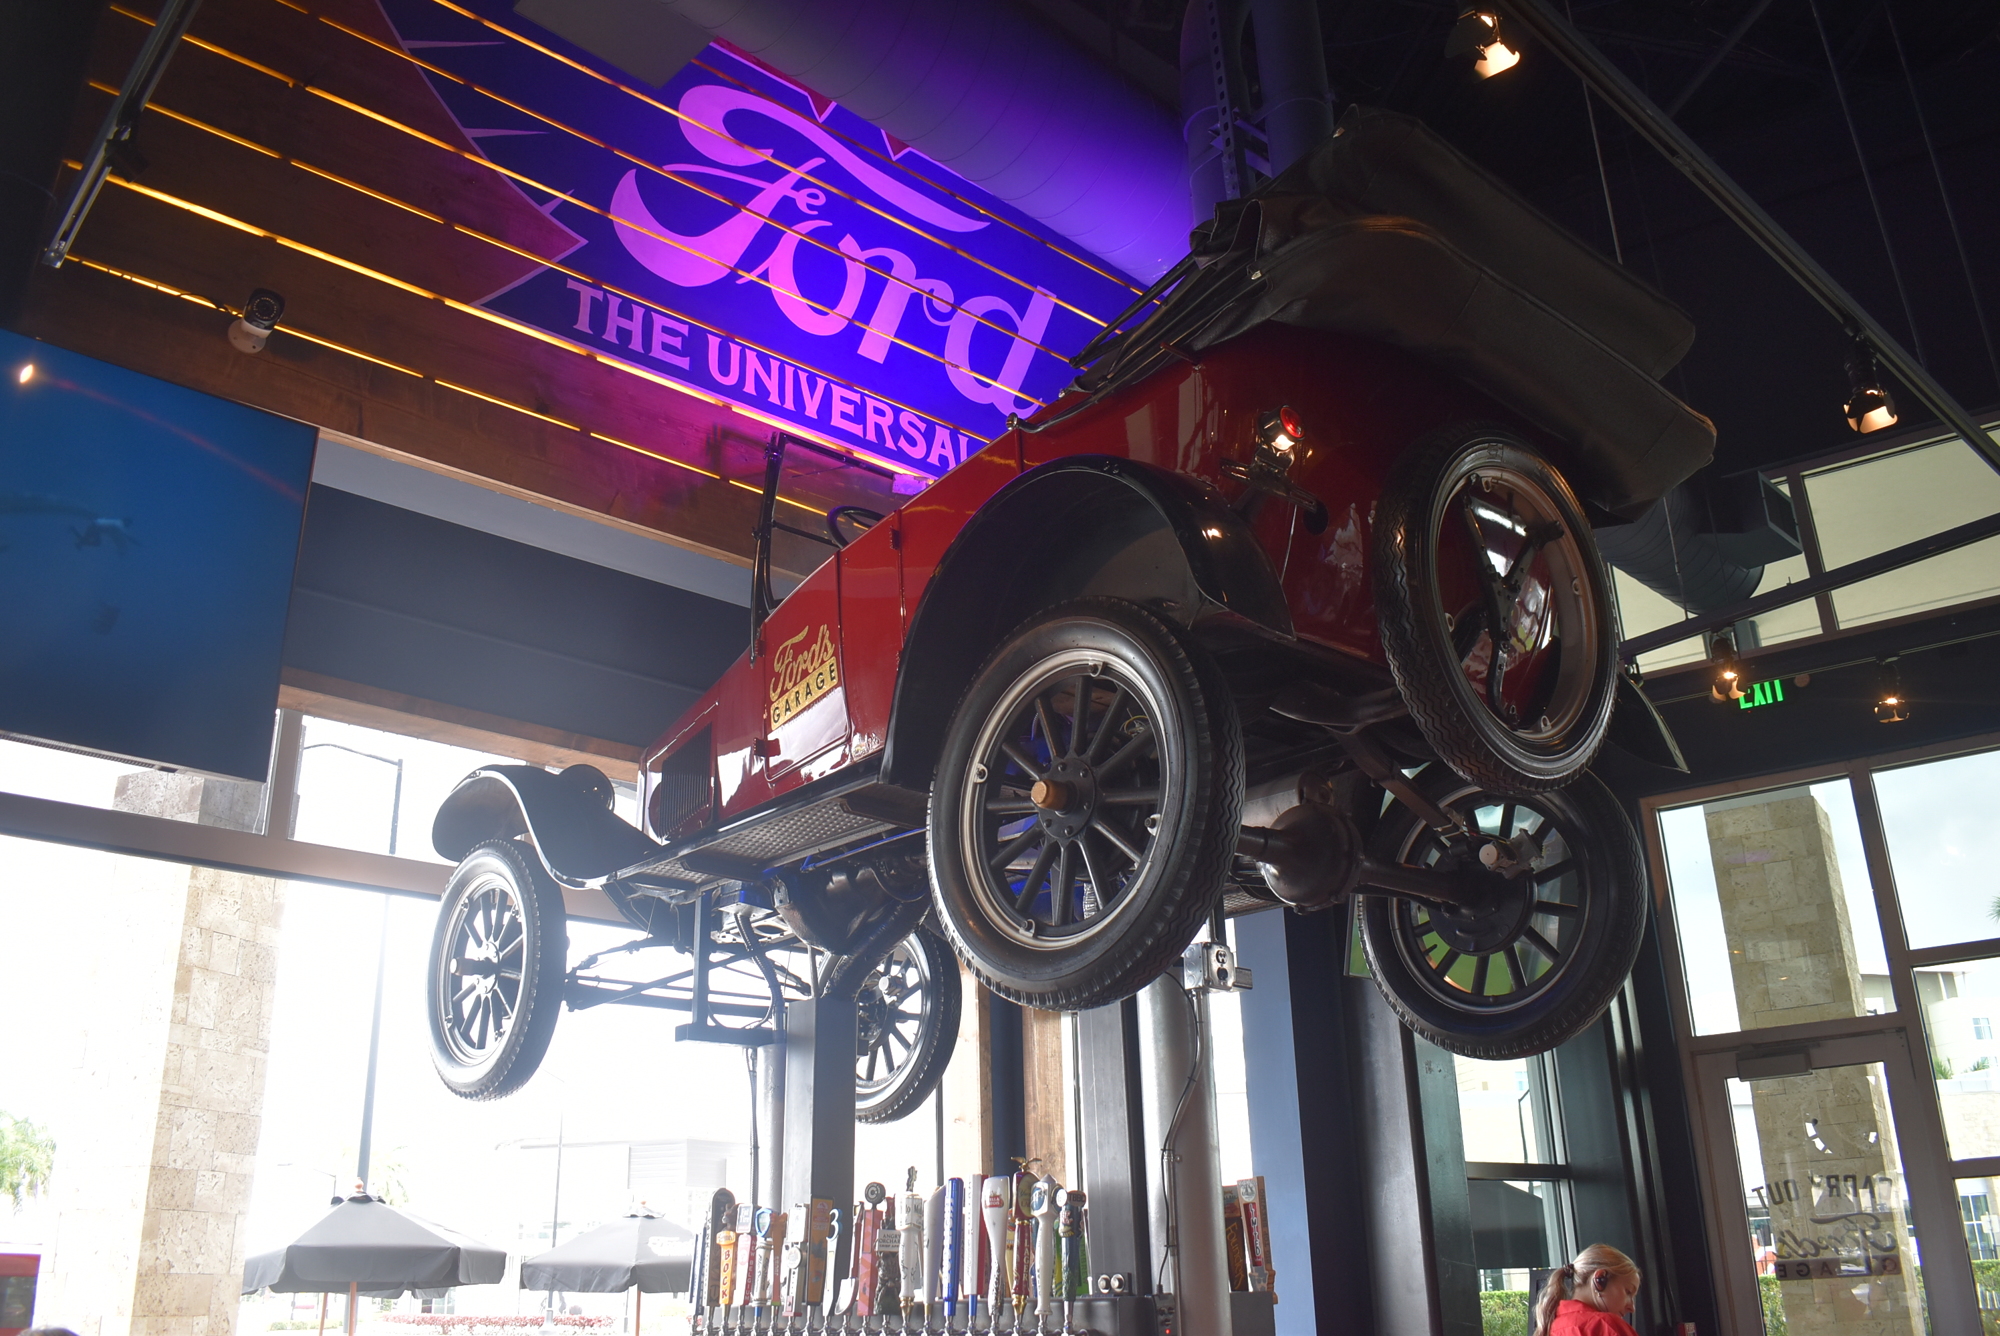 One of multiple vehicles that can be found inside Ford's Garage, a car sits propped above one of the restaurant's bars.